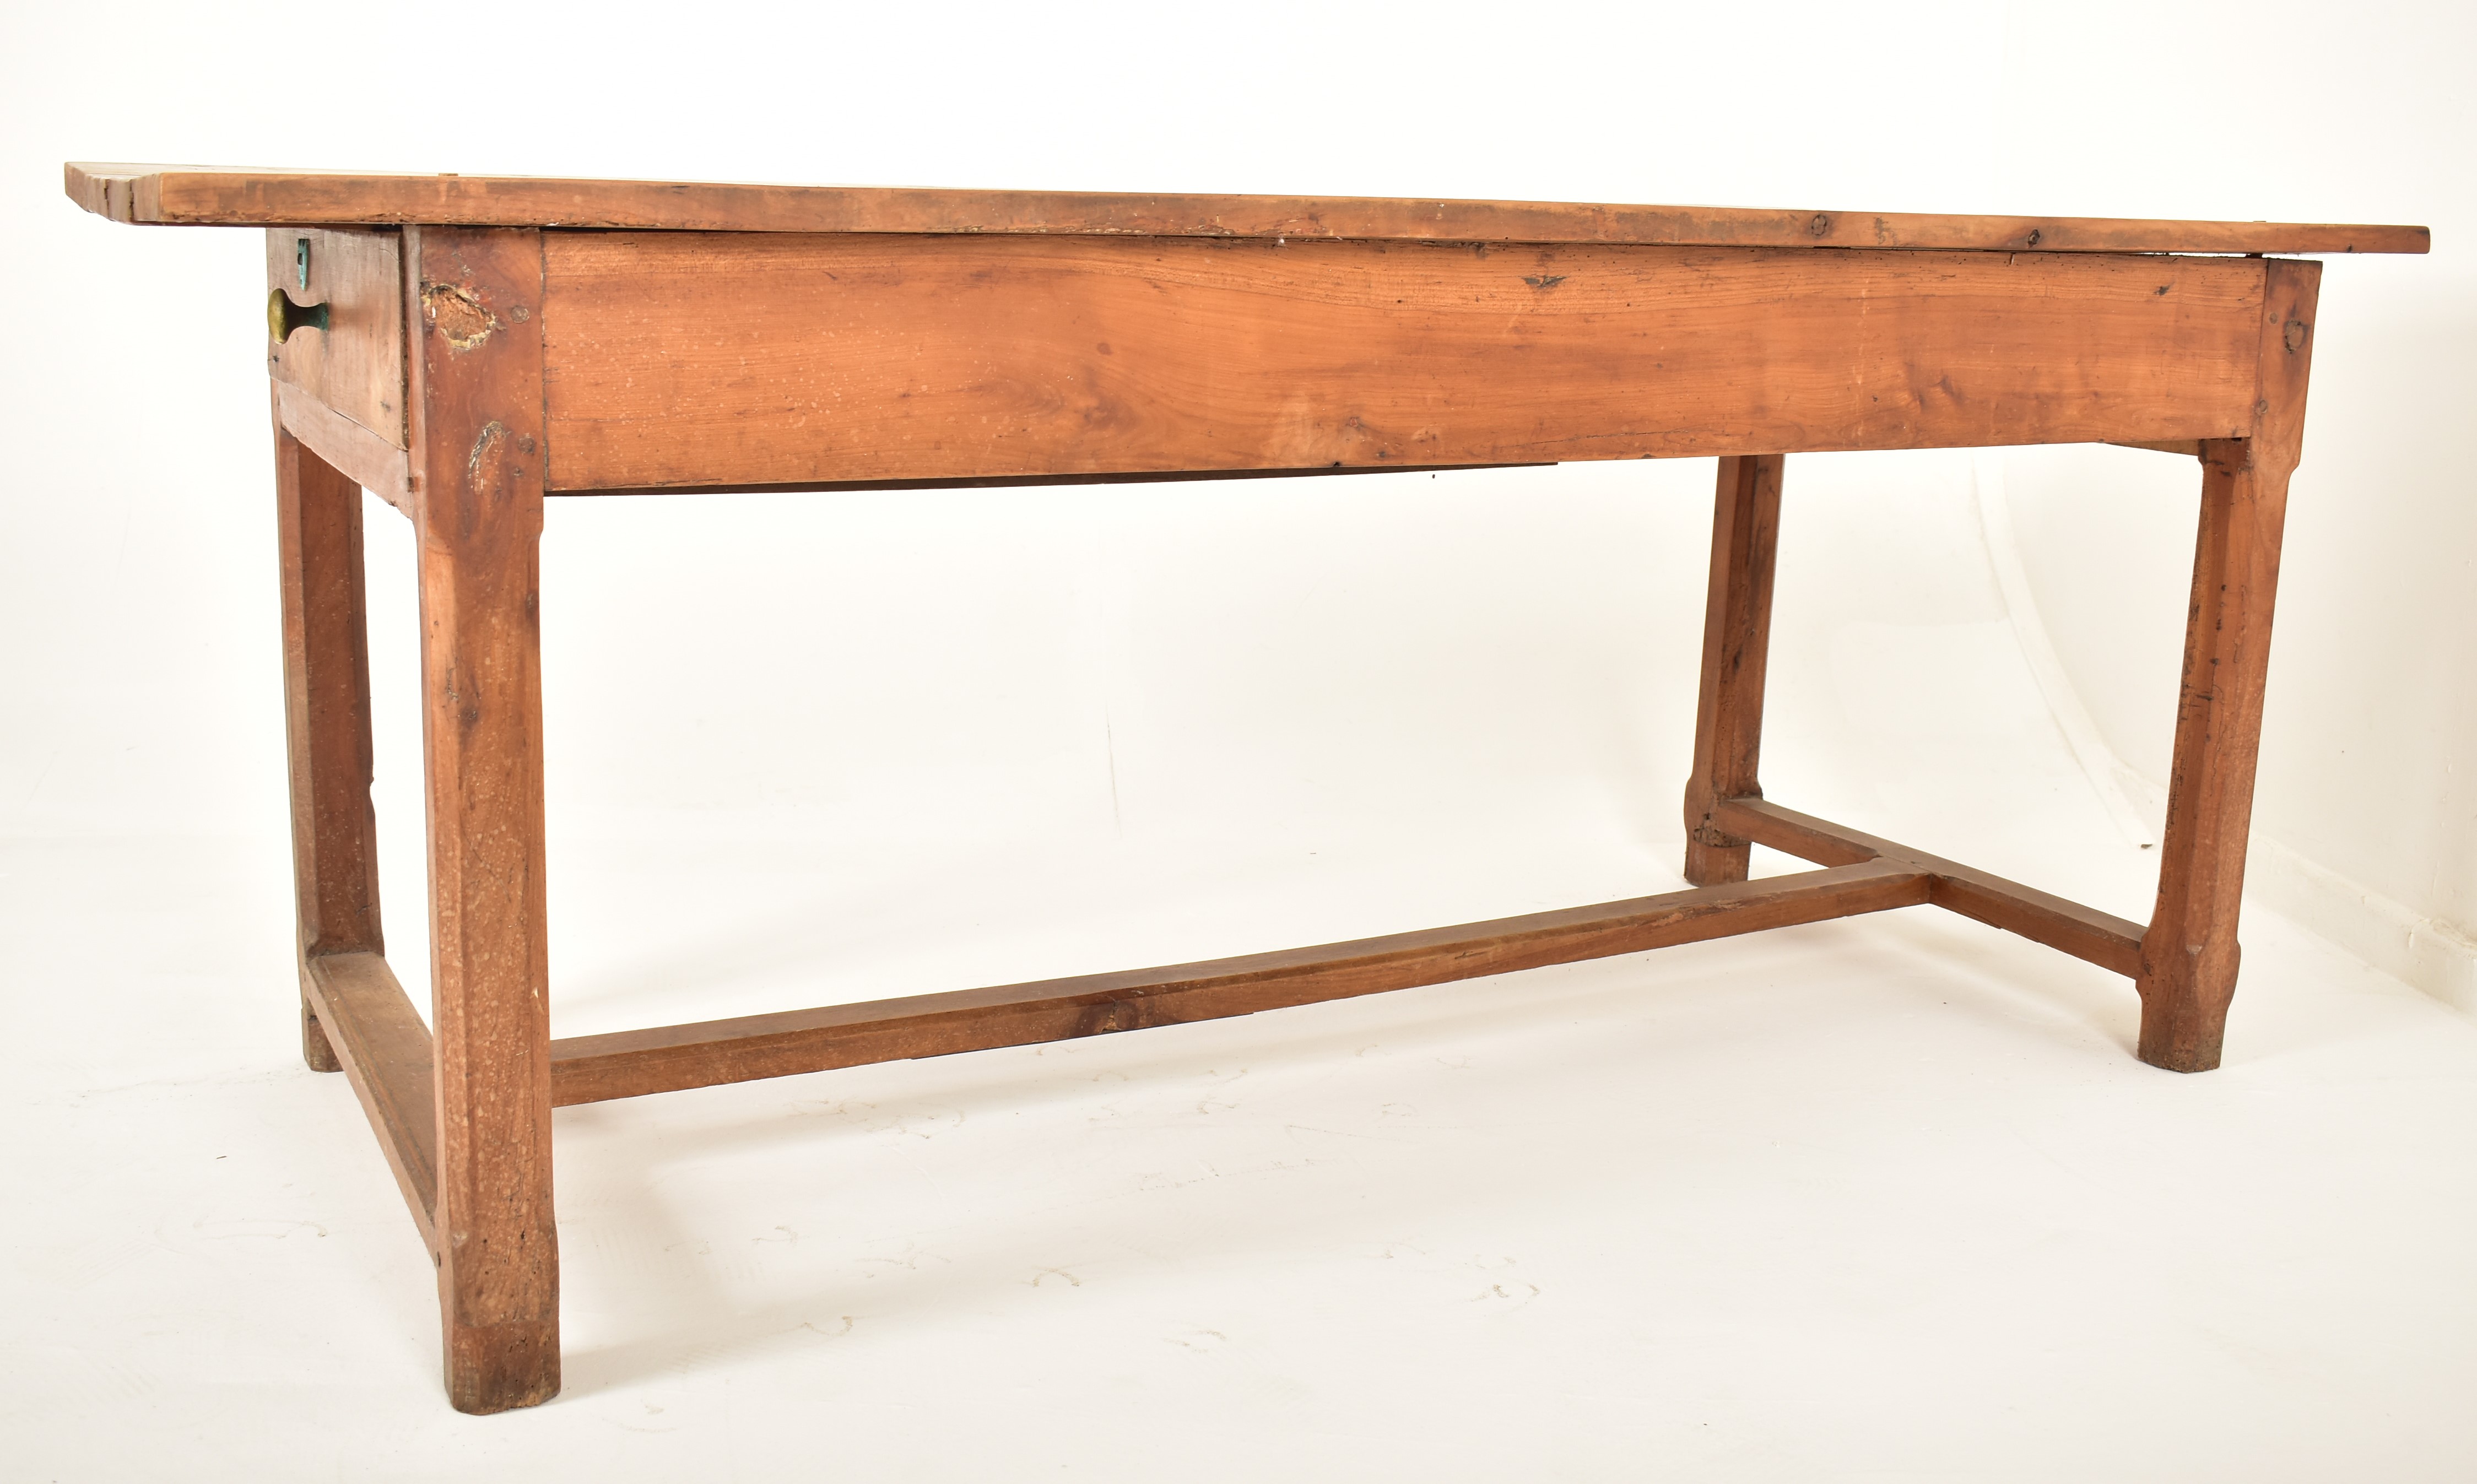 19TH CENTURY FRENCH CHESTNUT WOOD REFECTORY DINING TABLE - Image 6 of 6